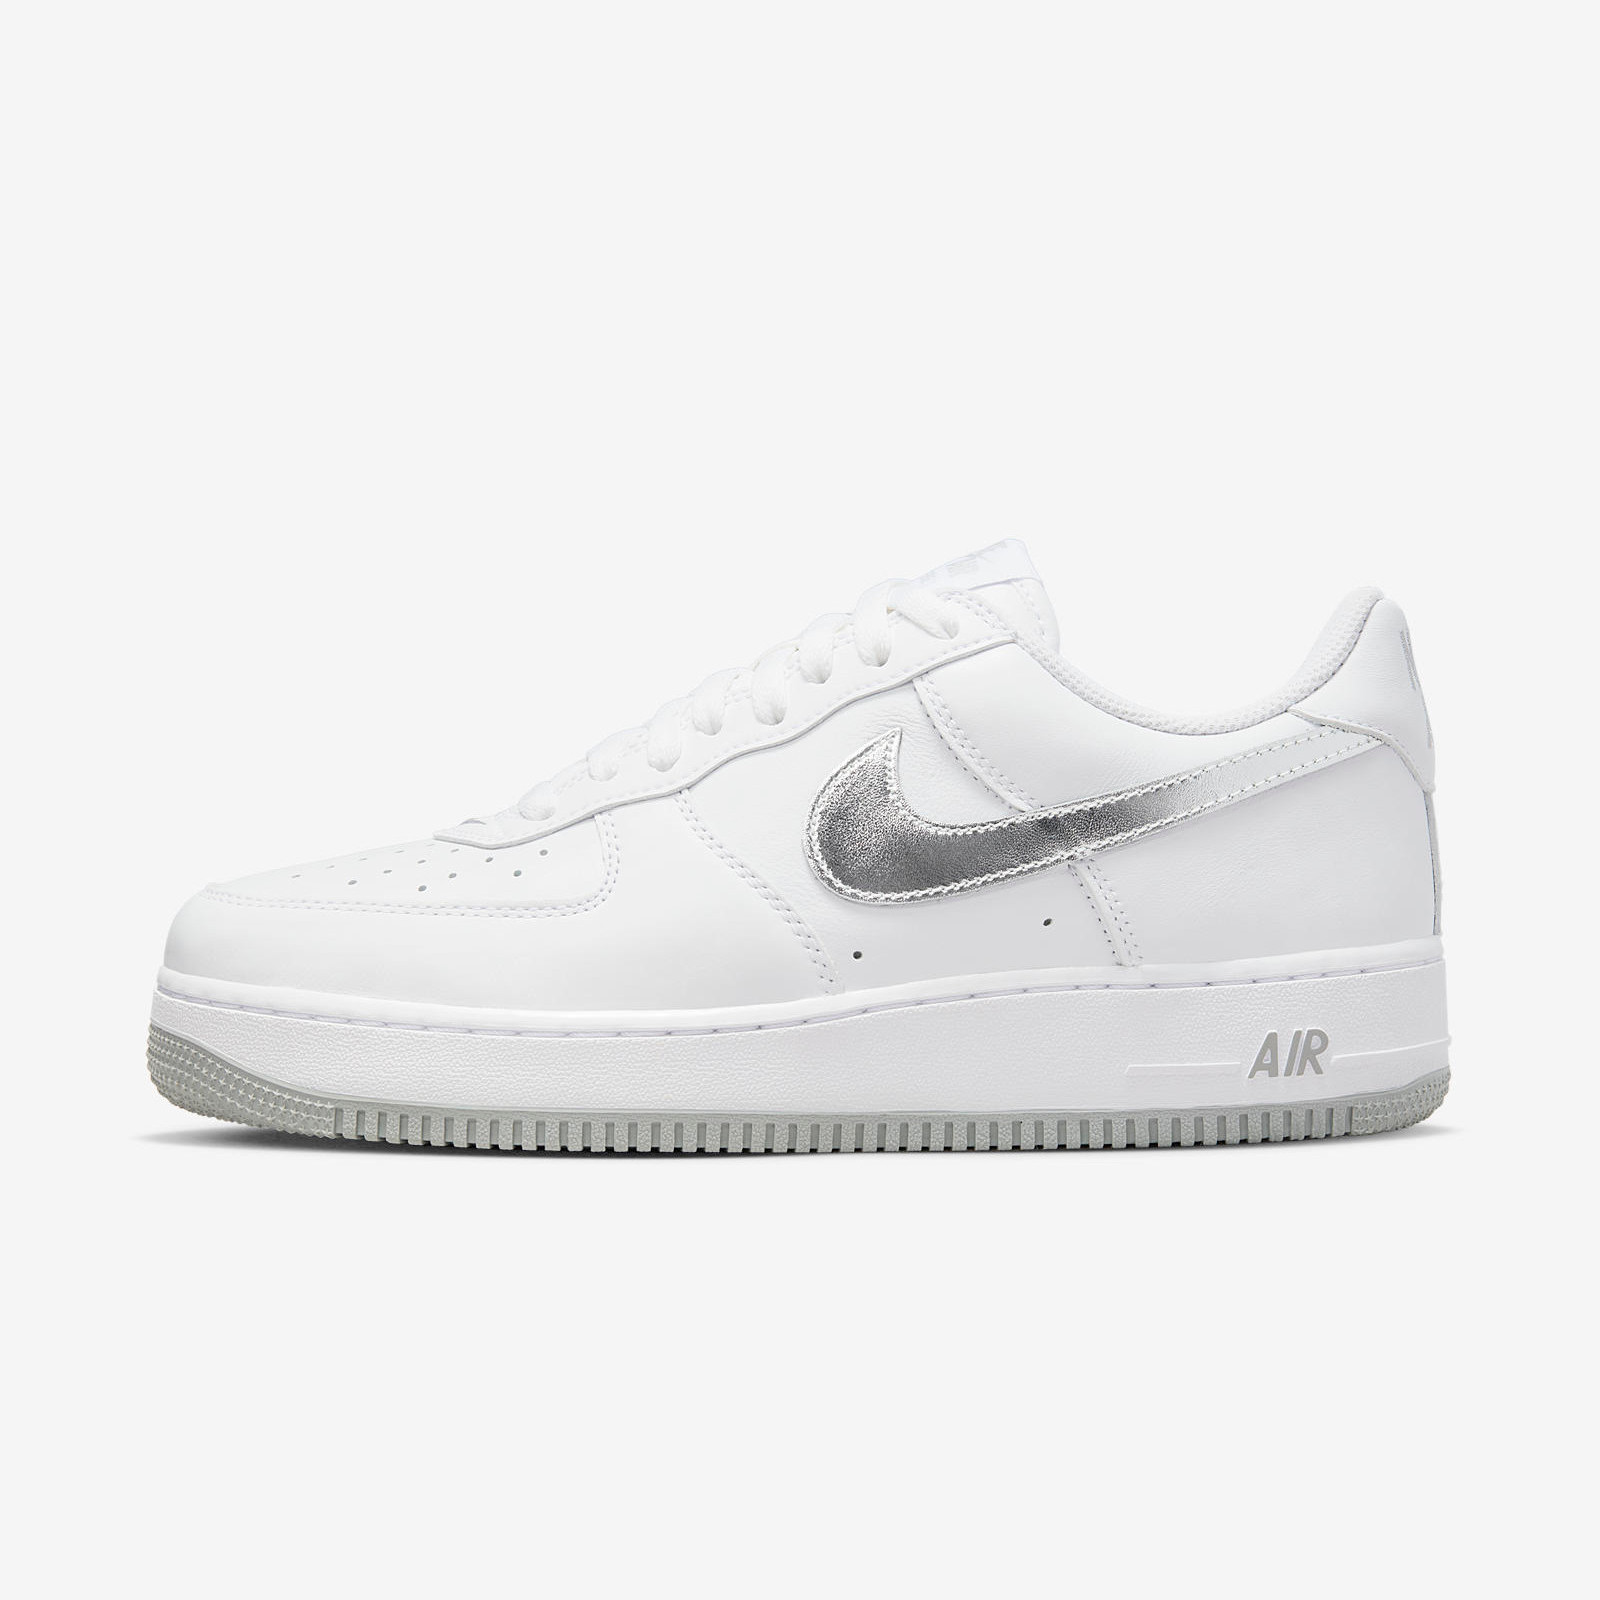 Nike Air Force 1 Low
« Color of the Month »